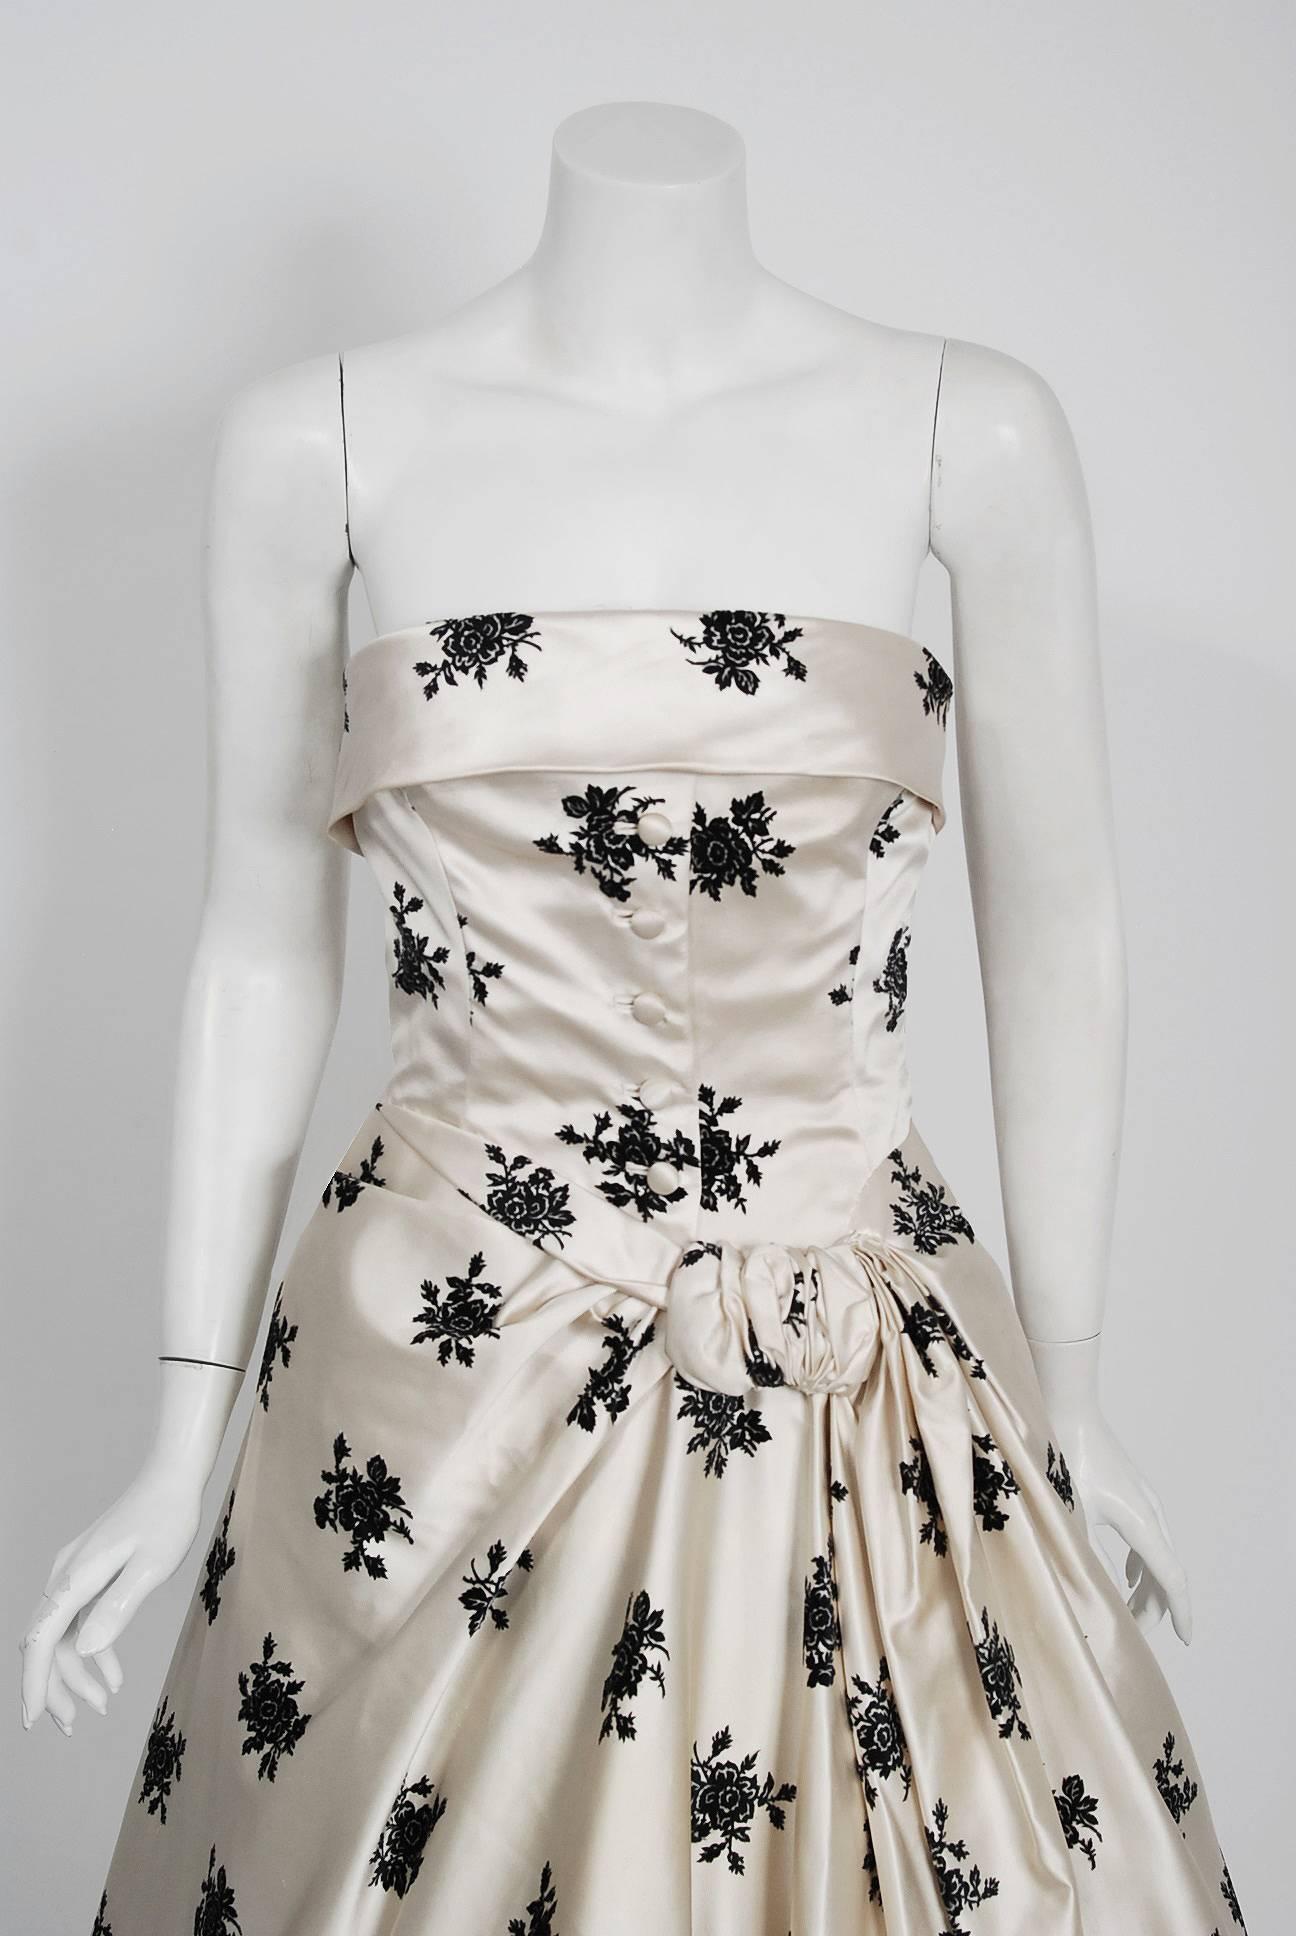 Breathtaking Hattie Carnegie Couture satin party dress dating back to her 1955 collection. The name Hattie Carnegie is very often associated with elegance and high fashion. Carnegie’s fashion philosophy is summed up as "the woman should wear